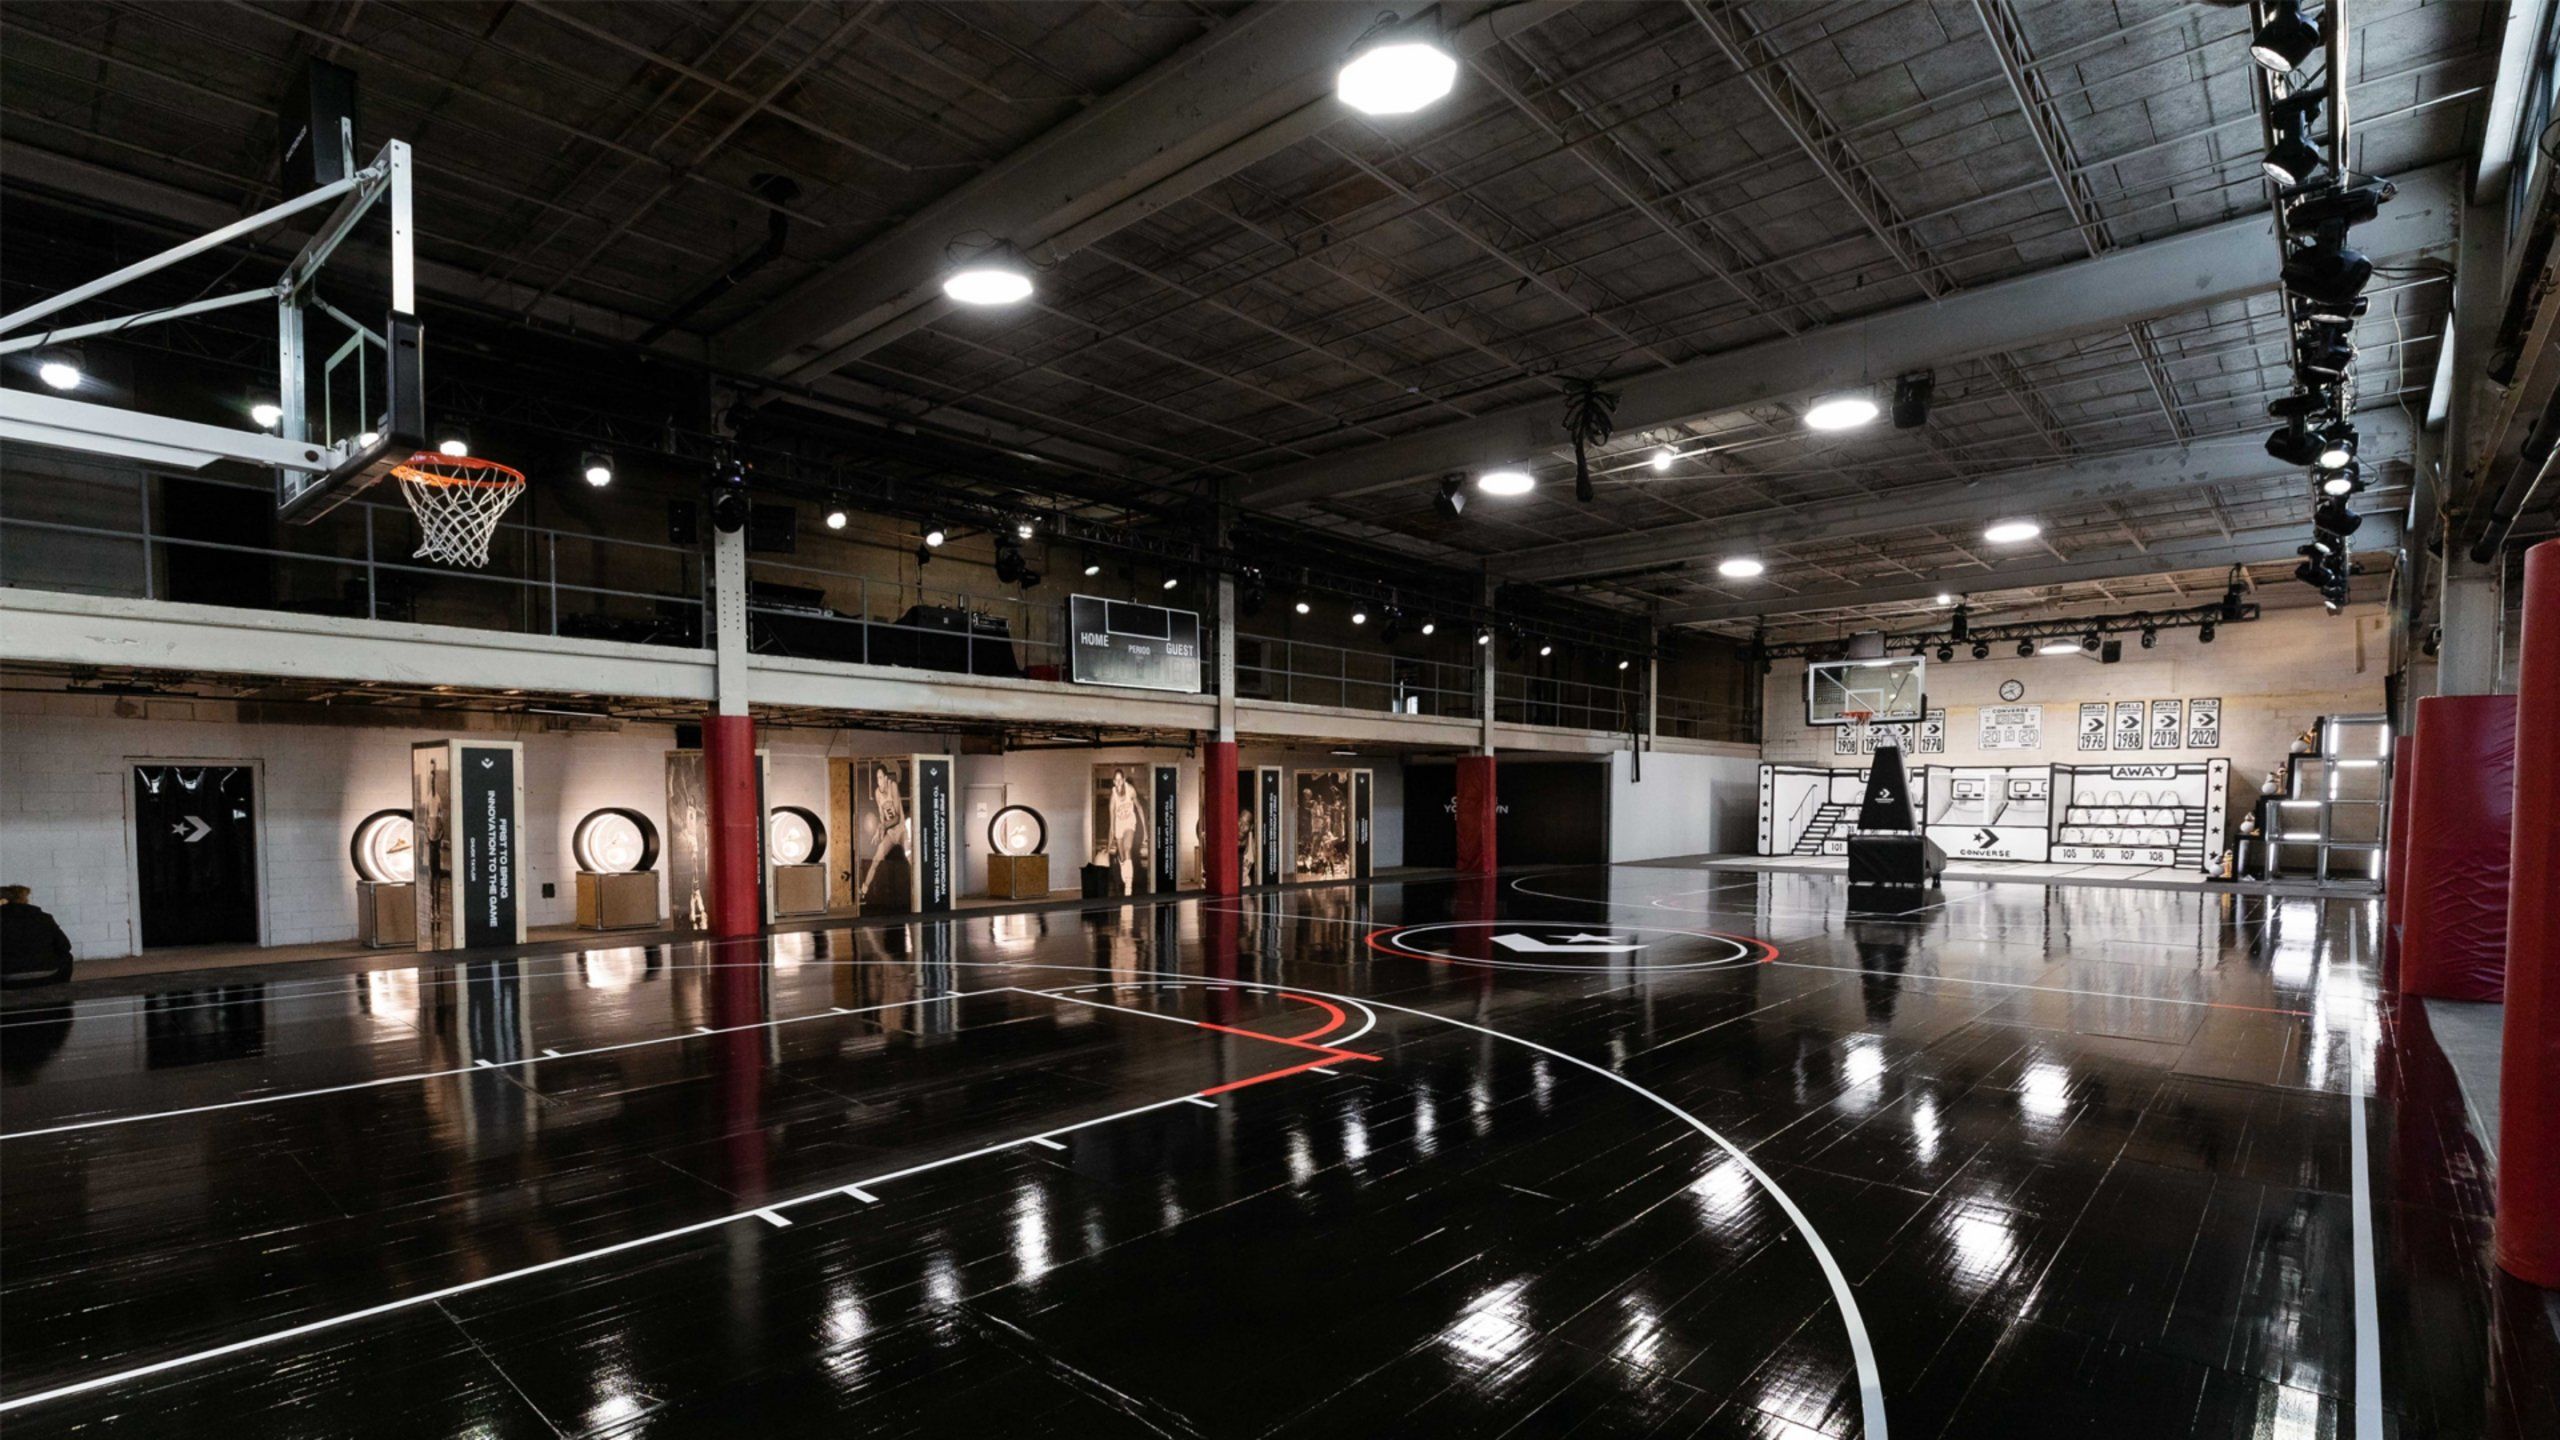 Converse basketball court with indoor lights, black floor and Converse logo center court